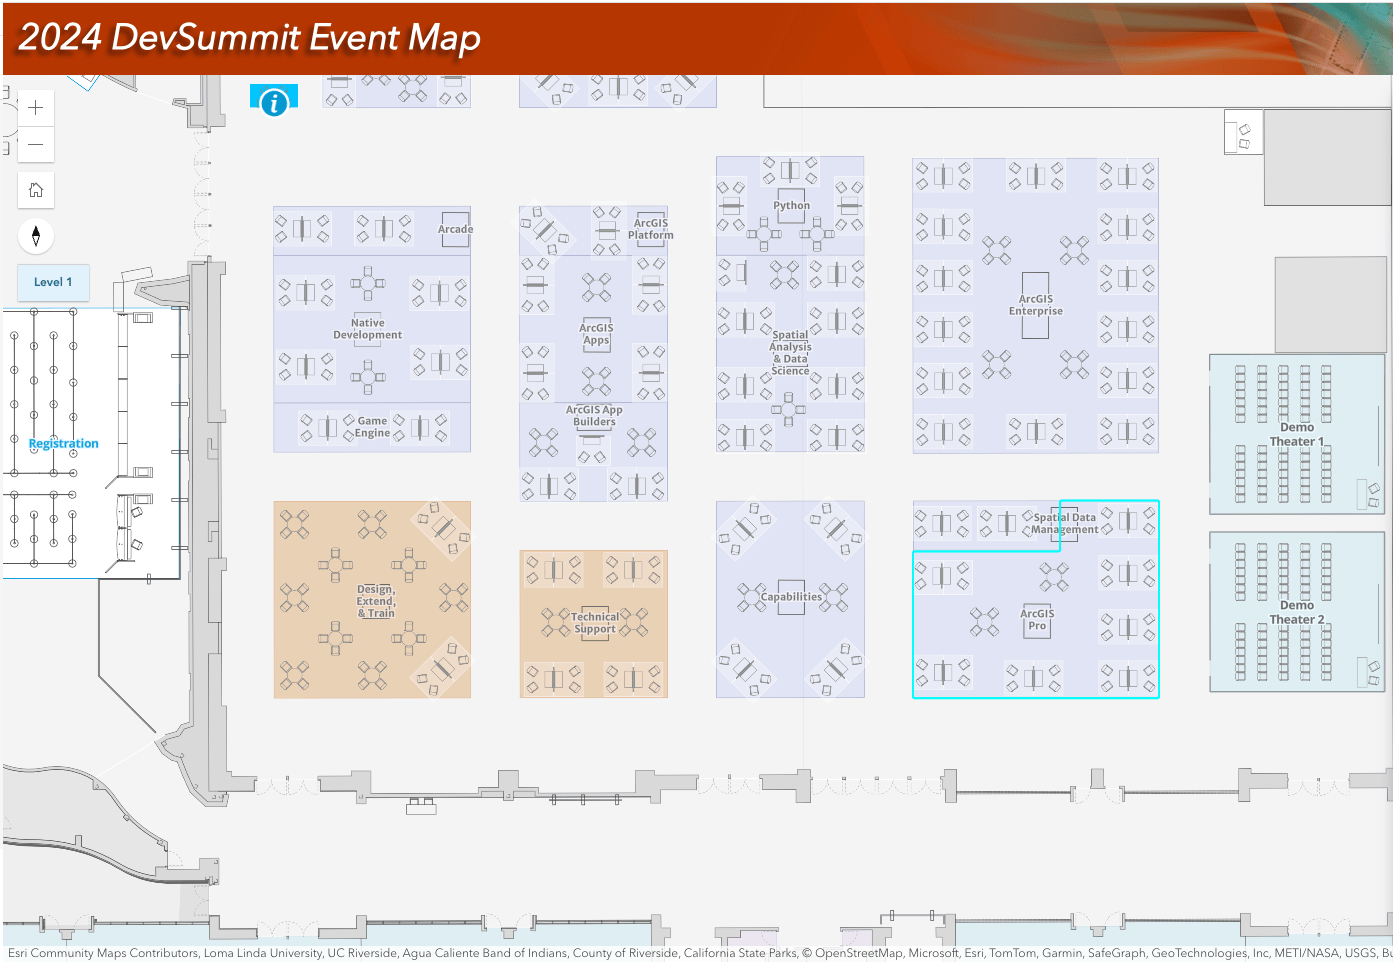 The layout of the Expo area at DevSummit with the ArcGIS Pro area highlighted.